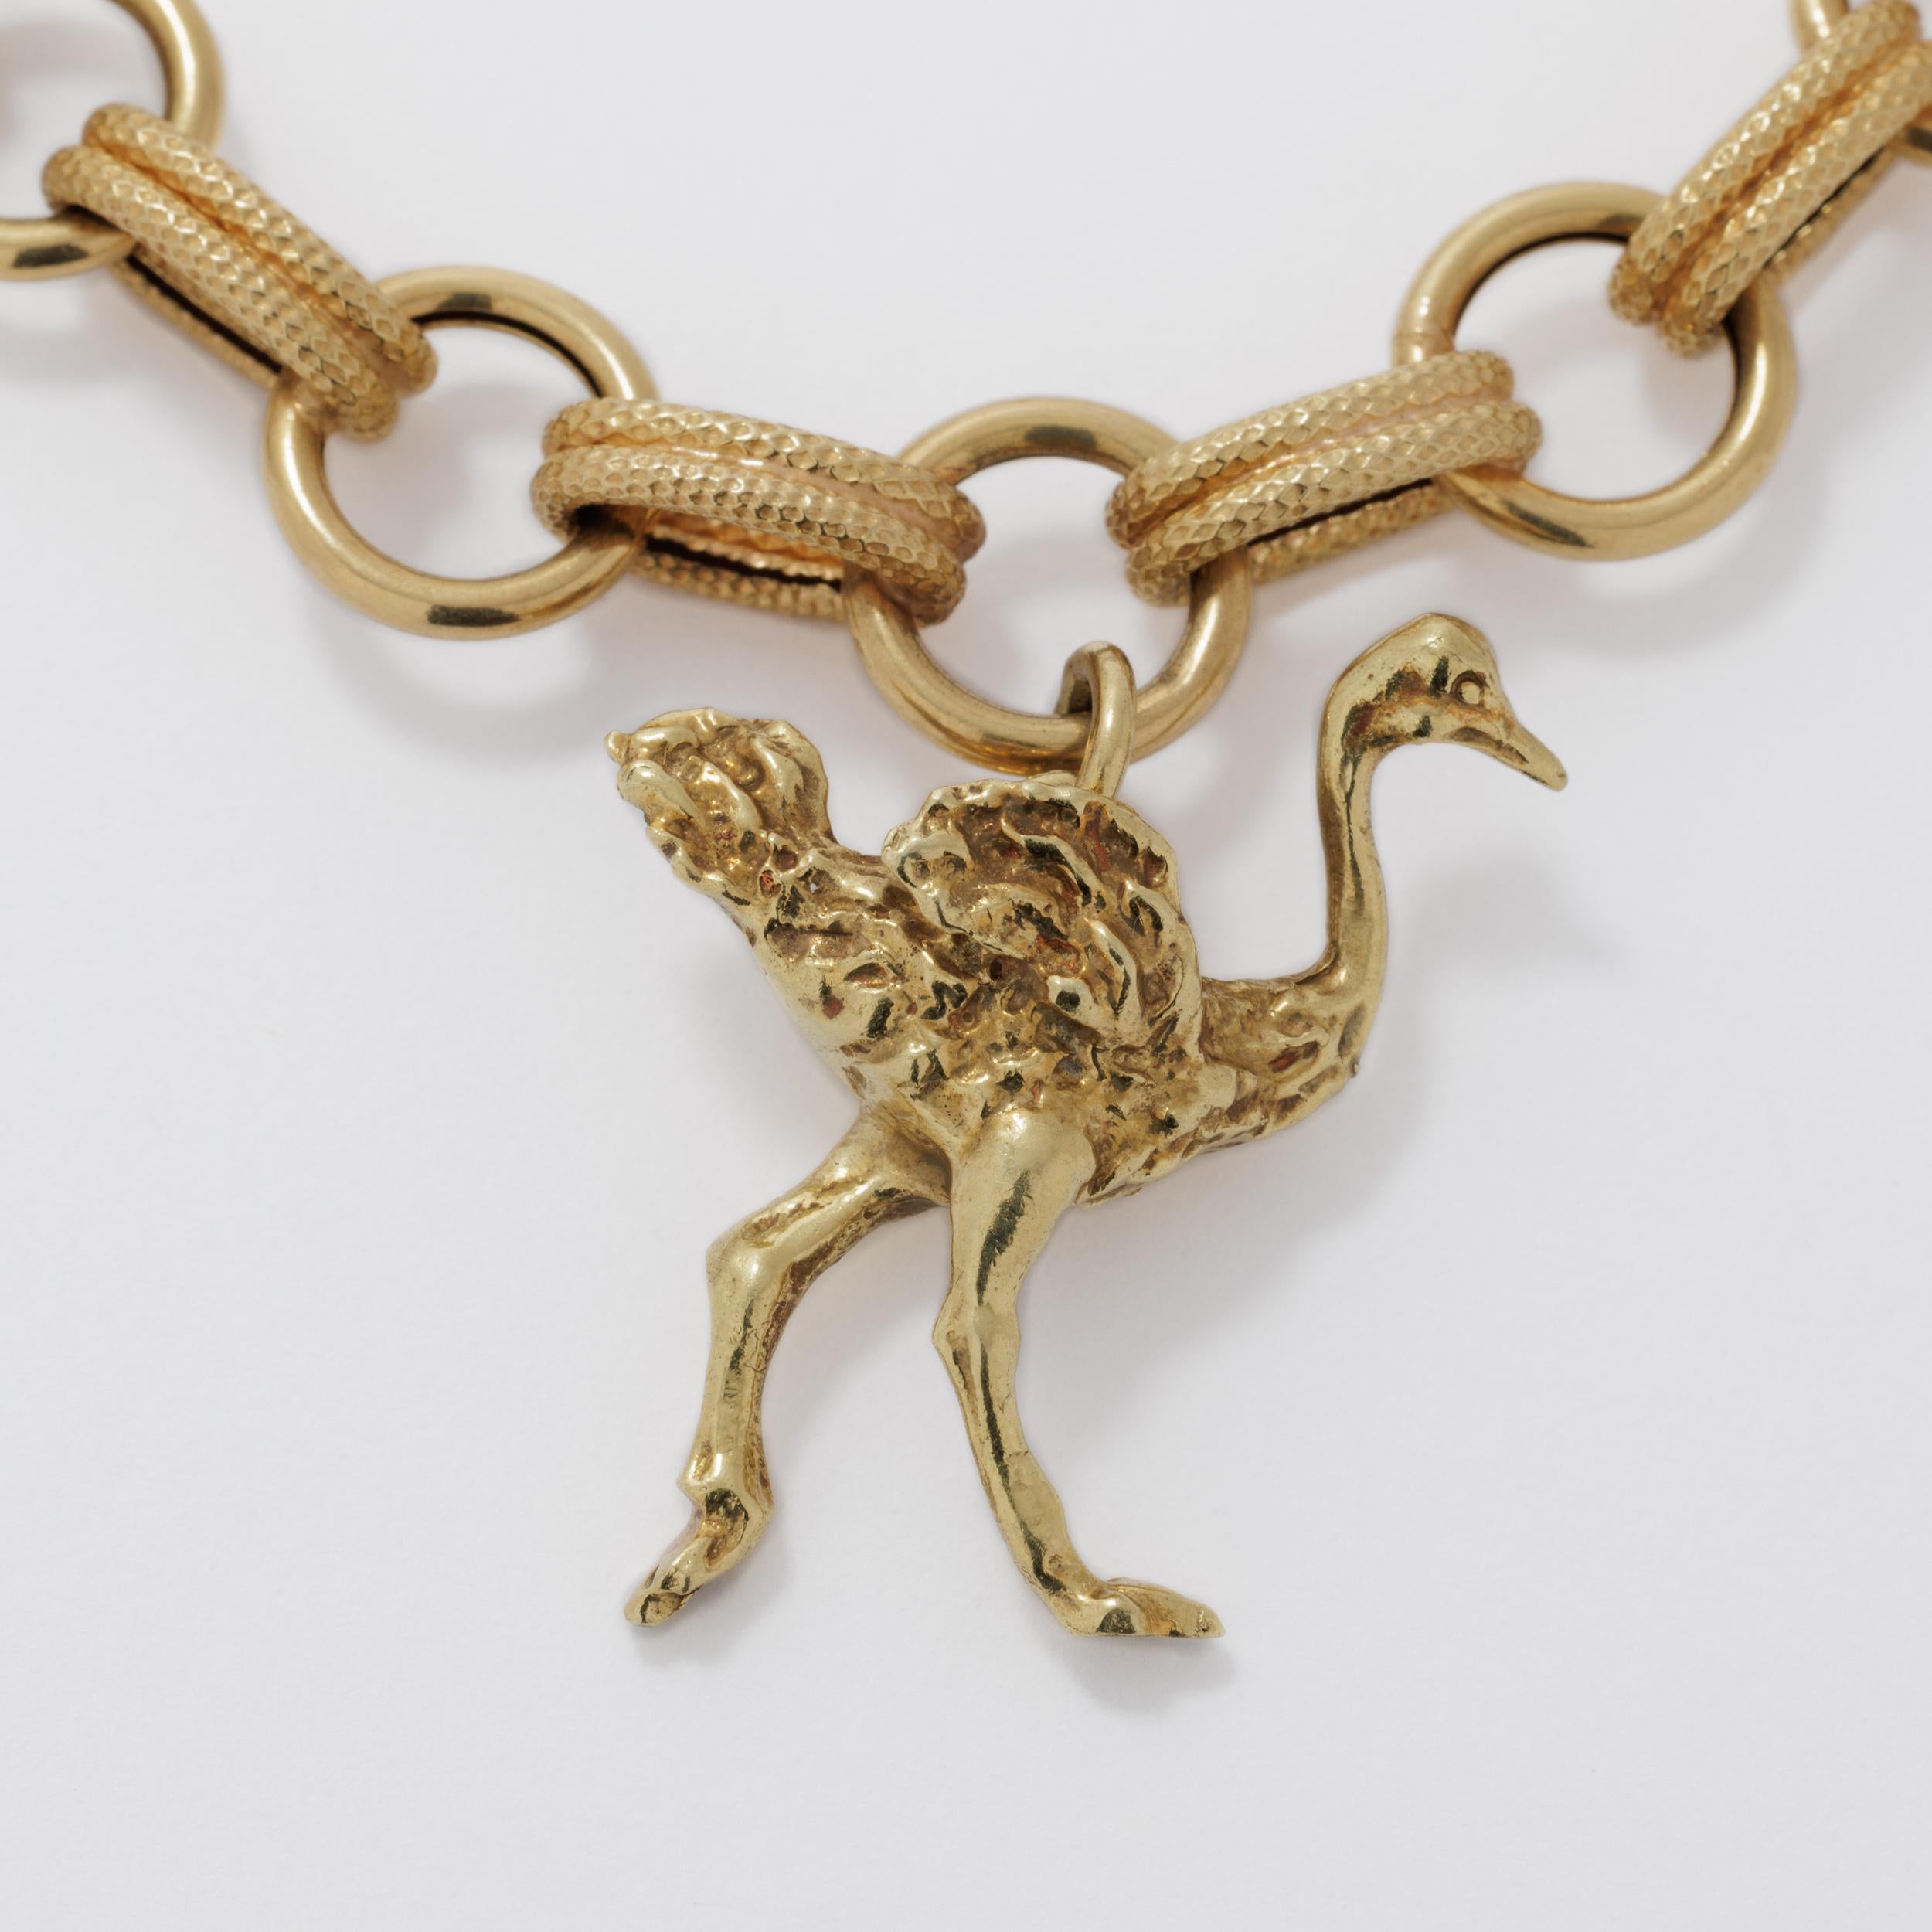 Vintage 18 Karat RARE African Souvenir Charm Bracelet featuring an extra large Giraffe, extra large Ostrich and a Map of Africa 
- all solid 18 Karat Gold 
c.1950s 

L 21.5 cm x 1.1 cm / 8.46 in. x 0.43 in.
Africa 2.6 cm x 2 cm / 1.02 in. x 0.79